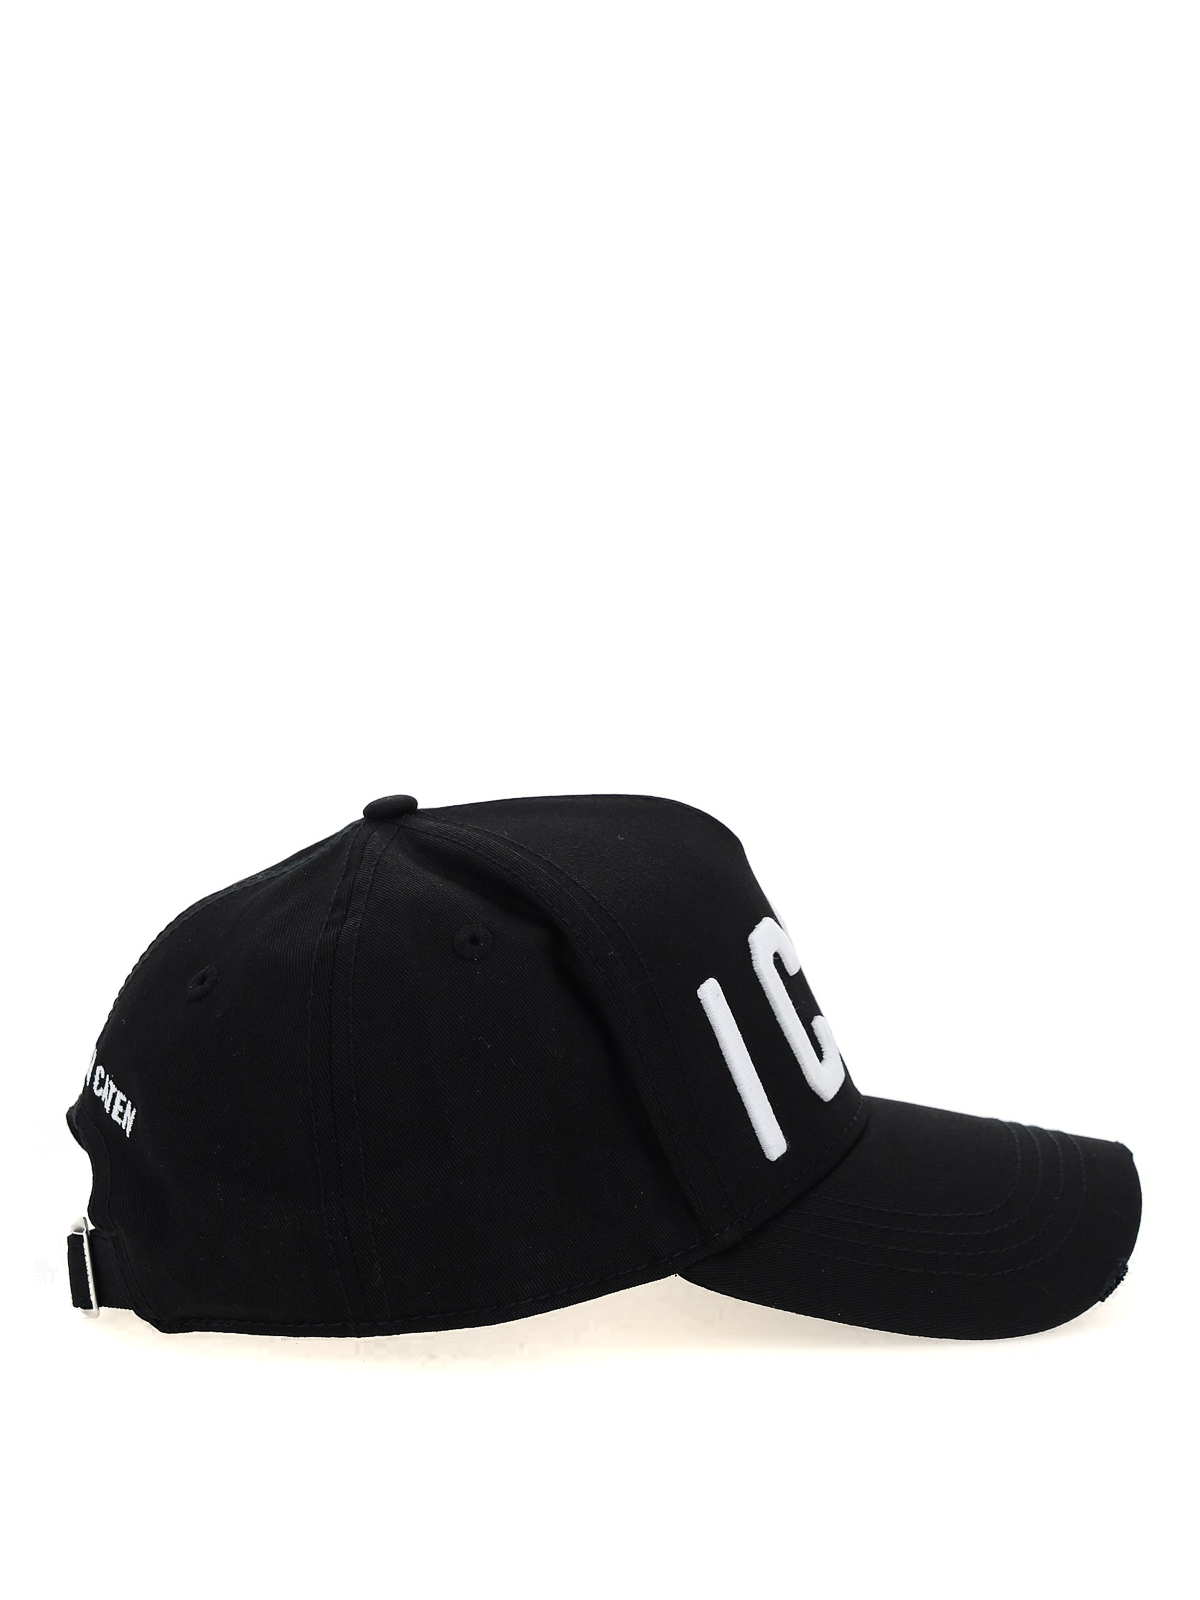 Shop Dsquared2 Icon Baseball Hat In Black